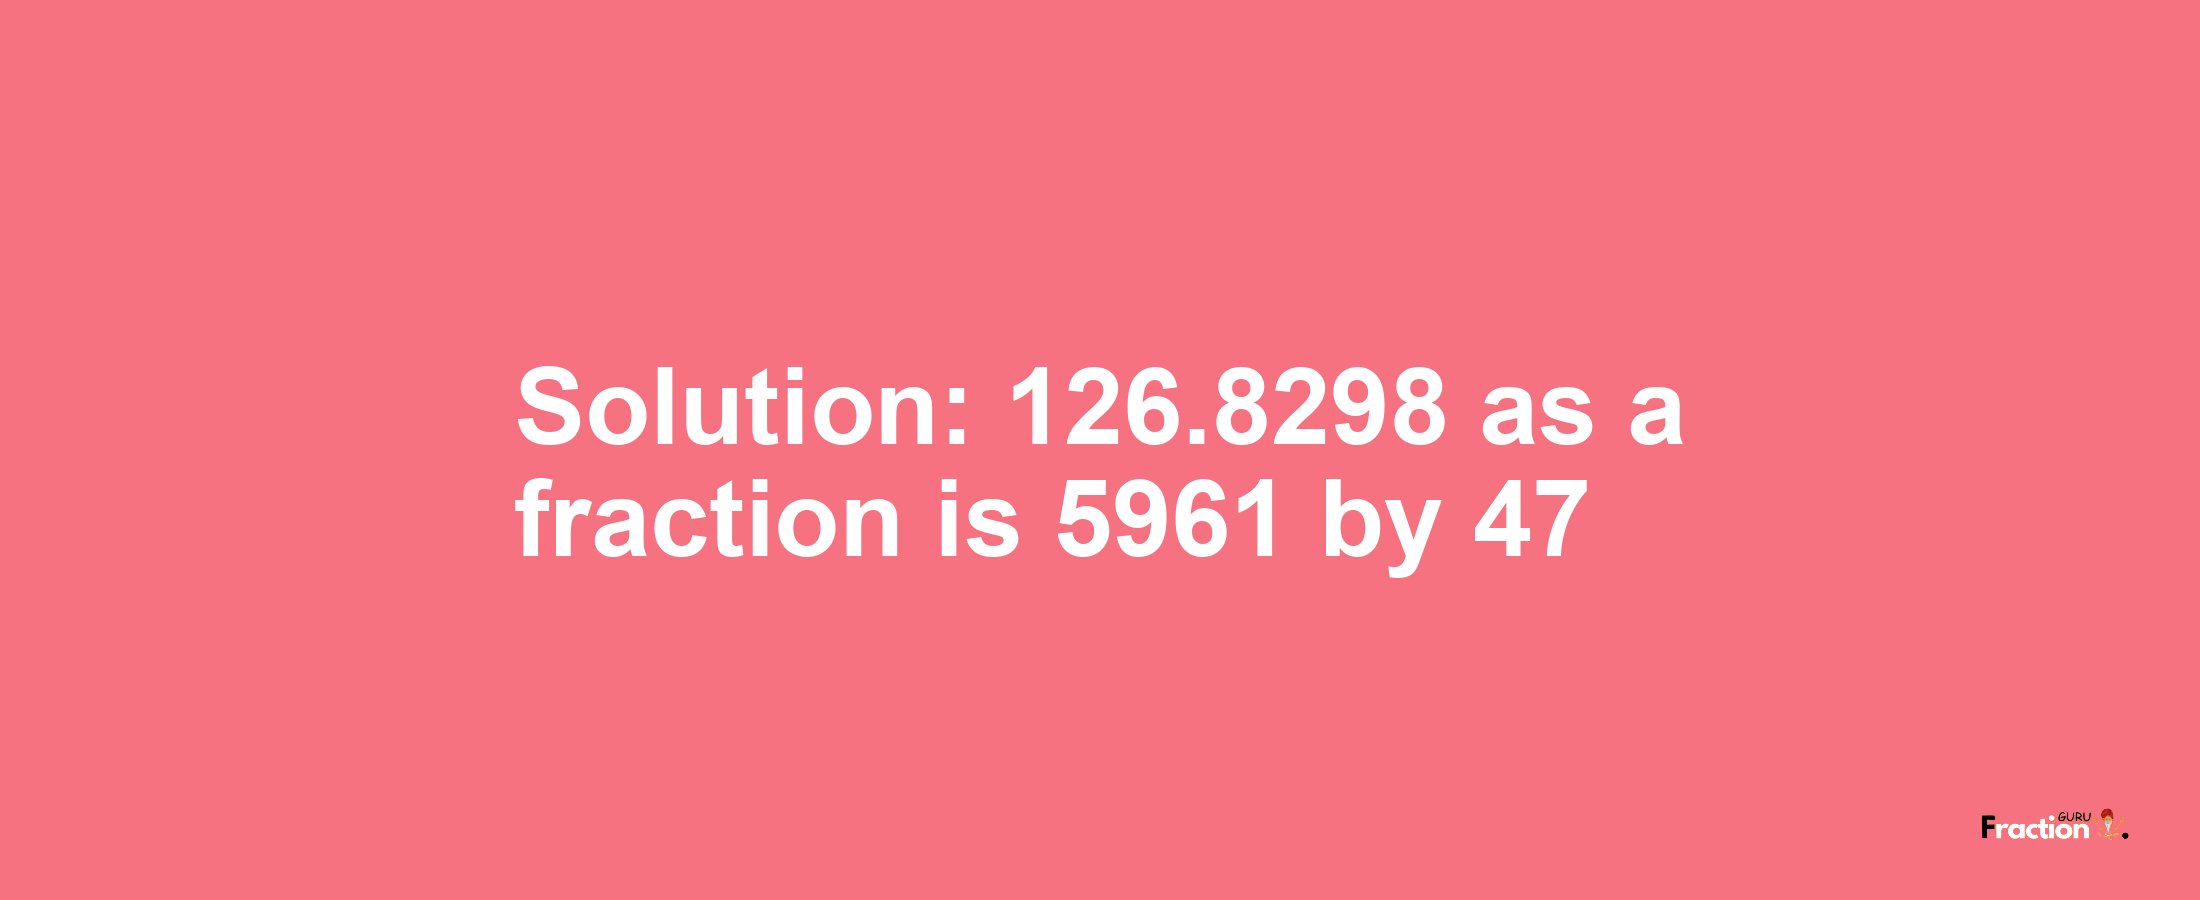 Solution:126.8298 as a fraction is 5961/47